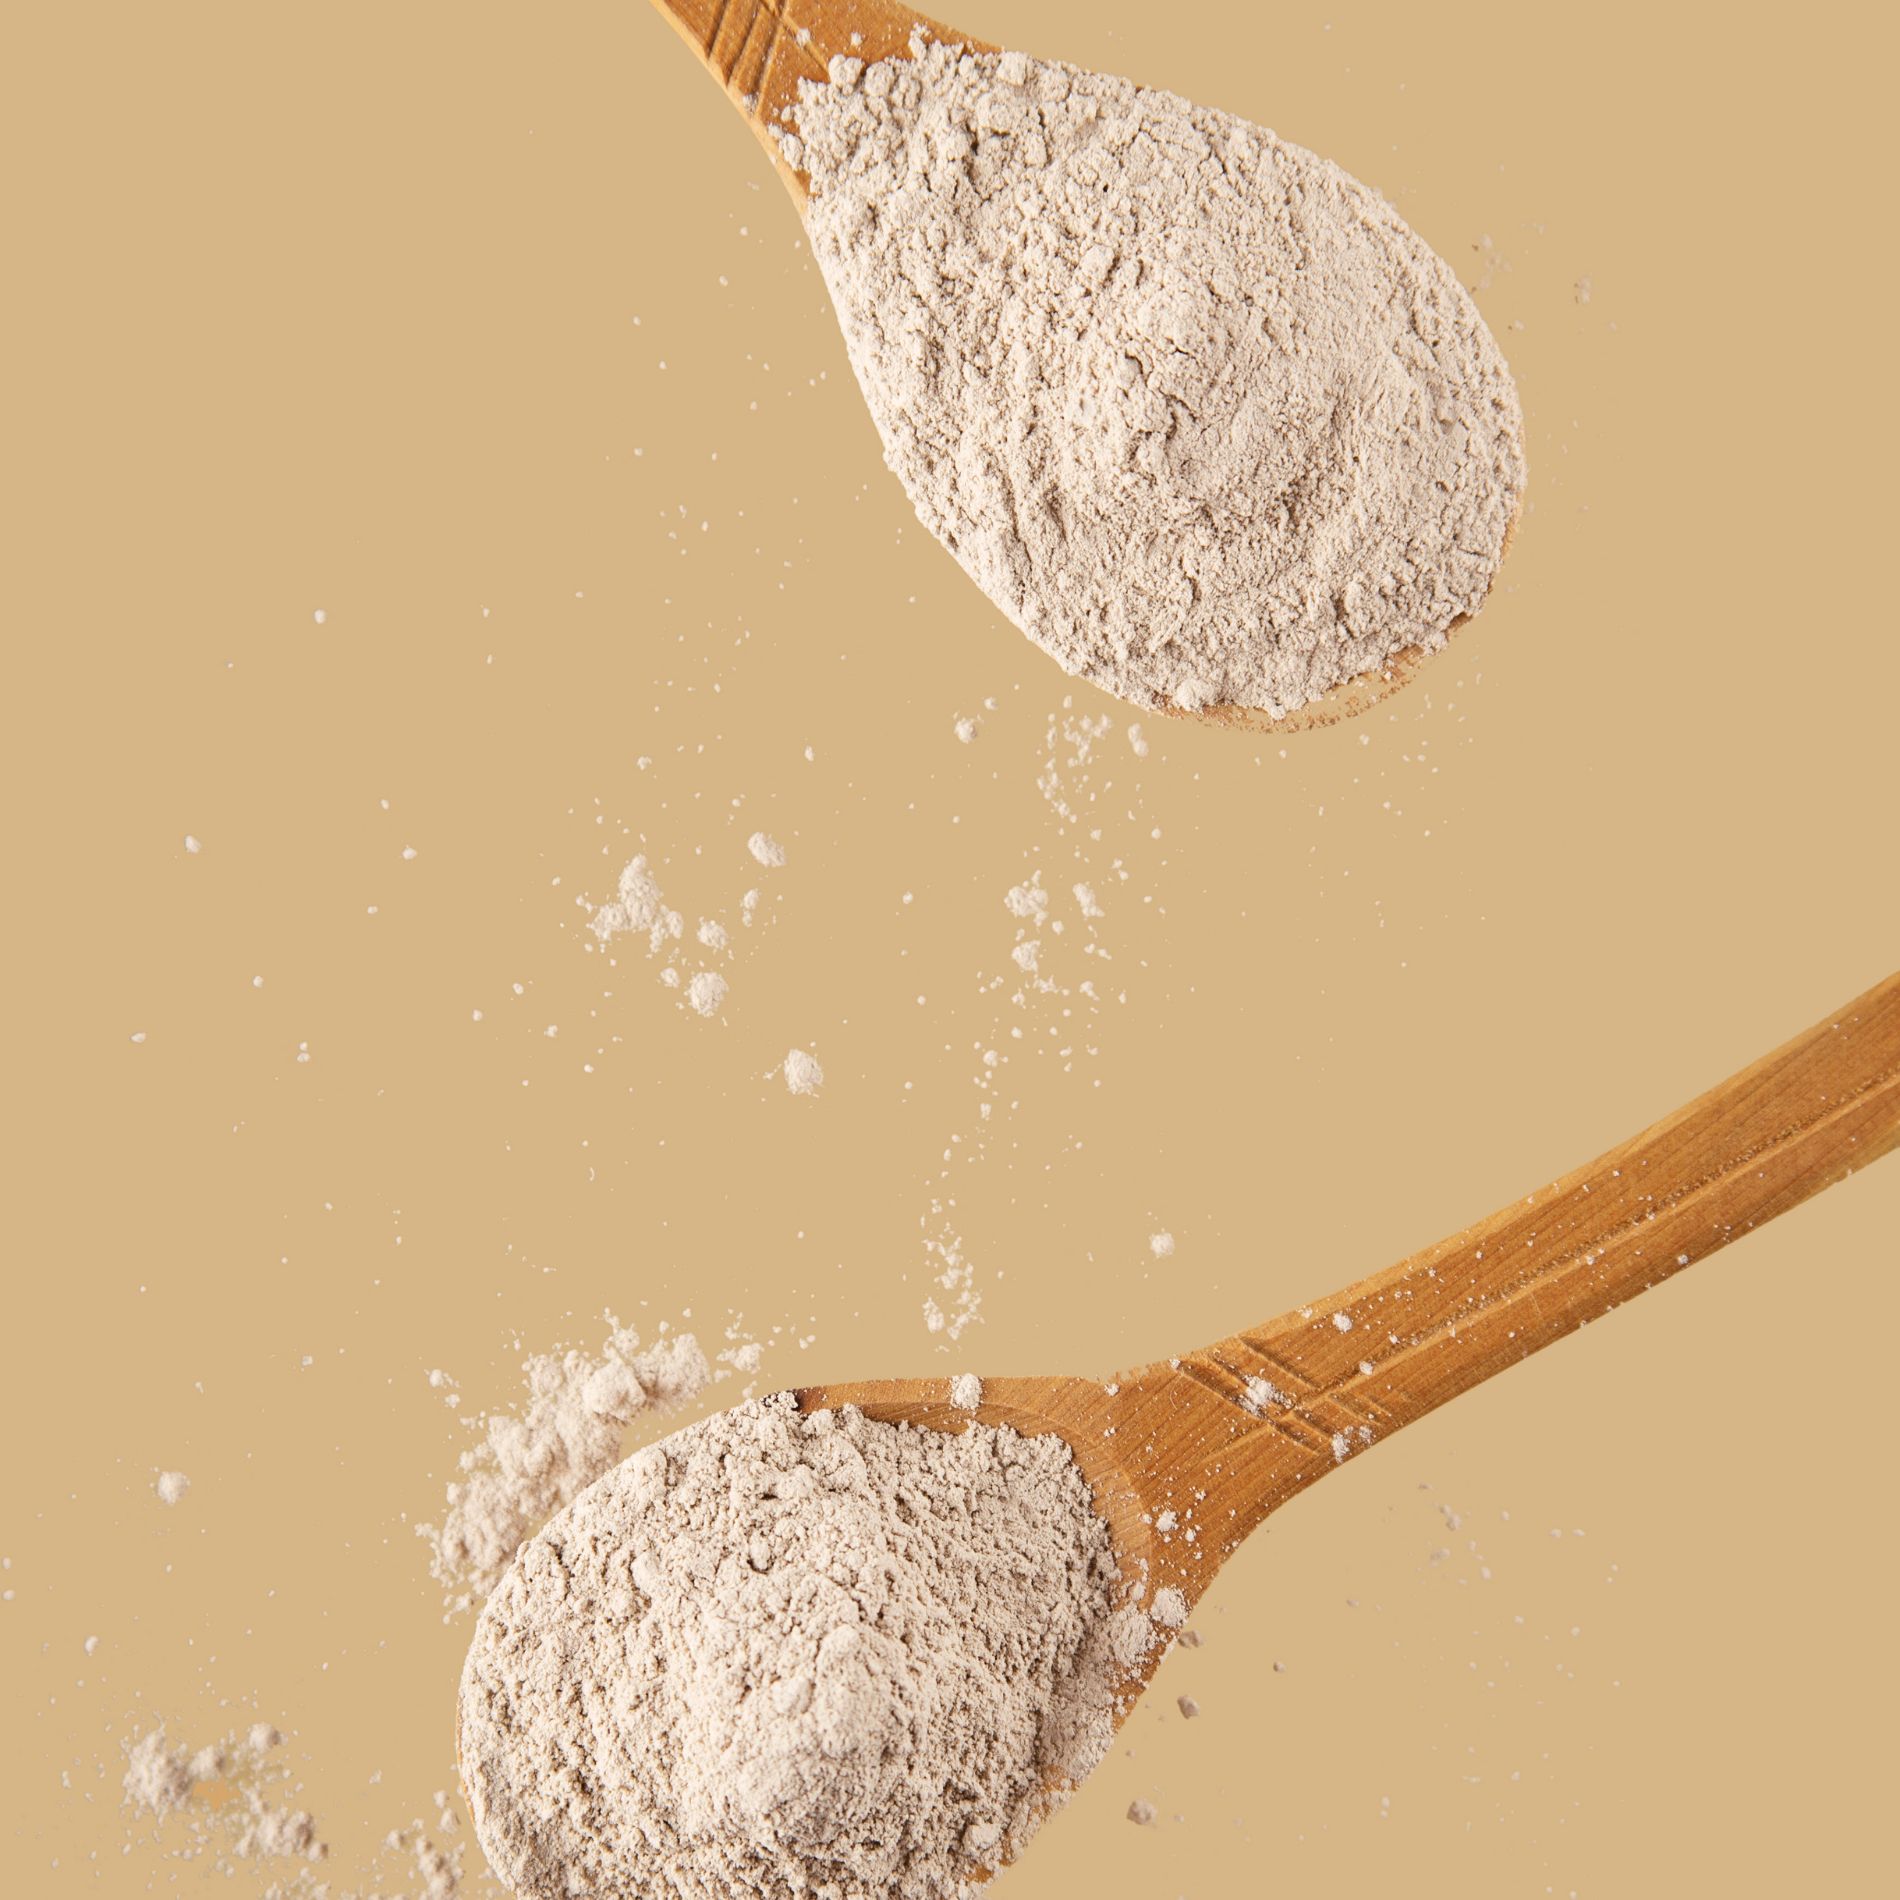 decorative image of tan powder on wooden spoons on tan background.